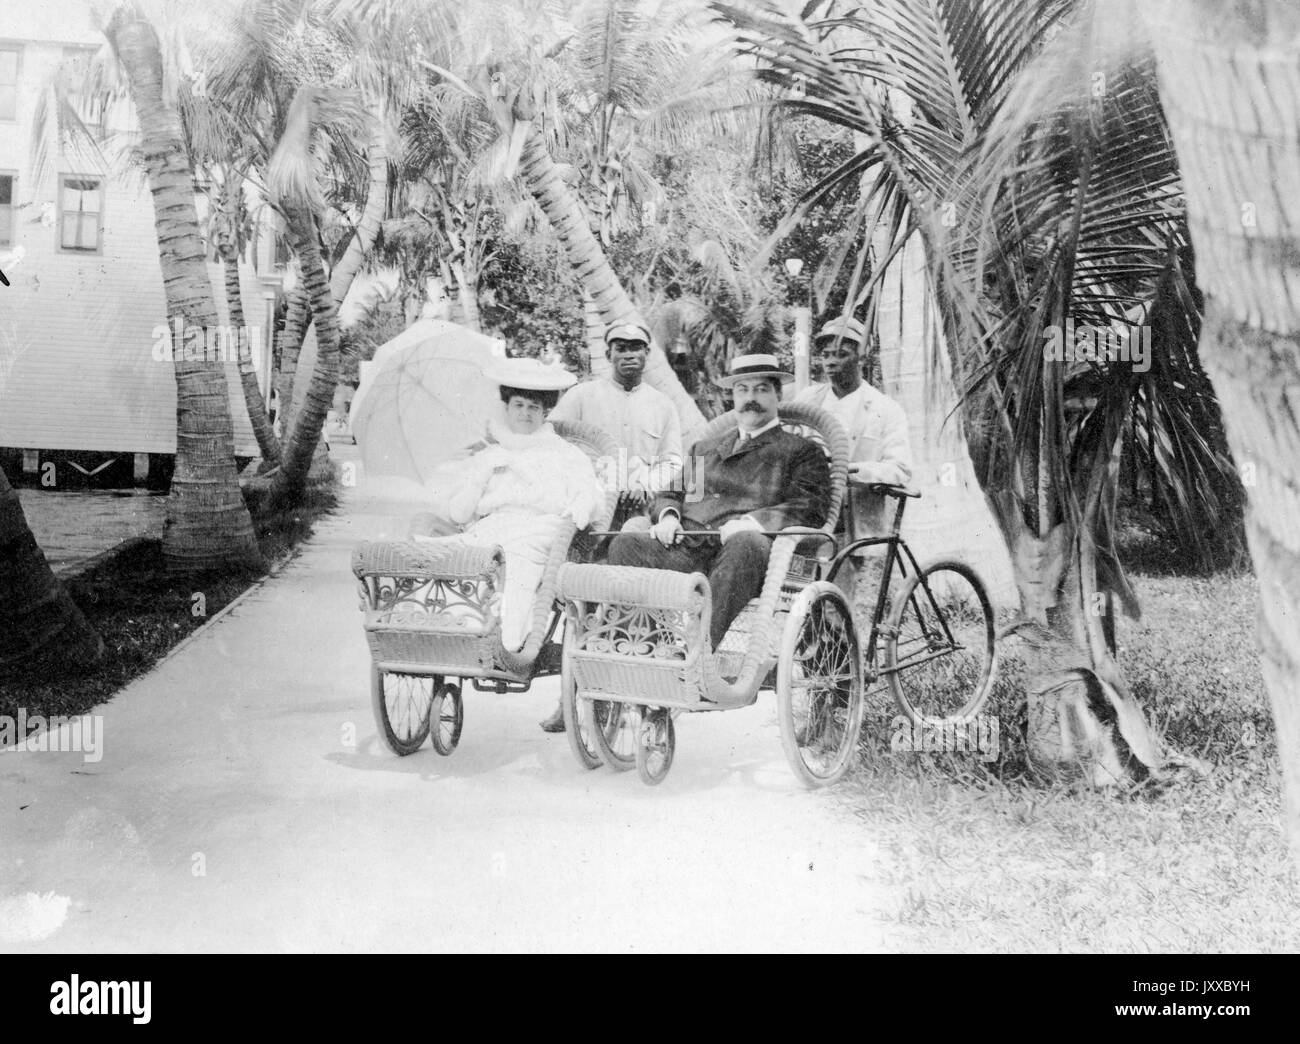 Two African American men carrying white man and woman in single carriages, white woman wearing light dress and light hat with parasol, white male wearing dark suit and hat holding cane, African American men wearing light uniforms and caps, standing and sitting outside in front of palm trees and house, neutral expressions, 1906. Stock Photo